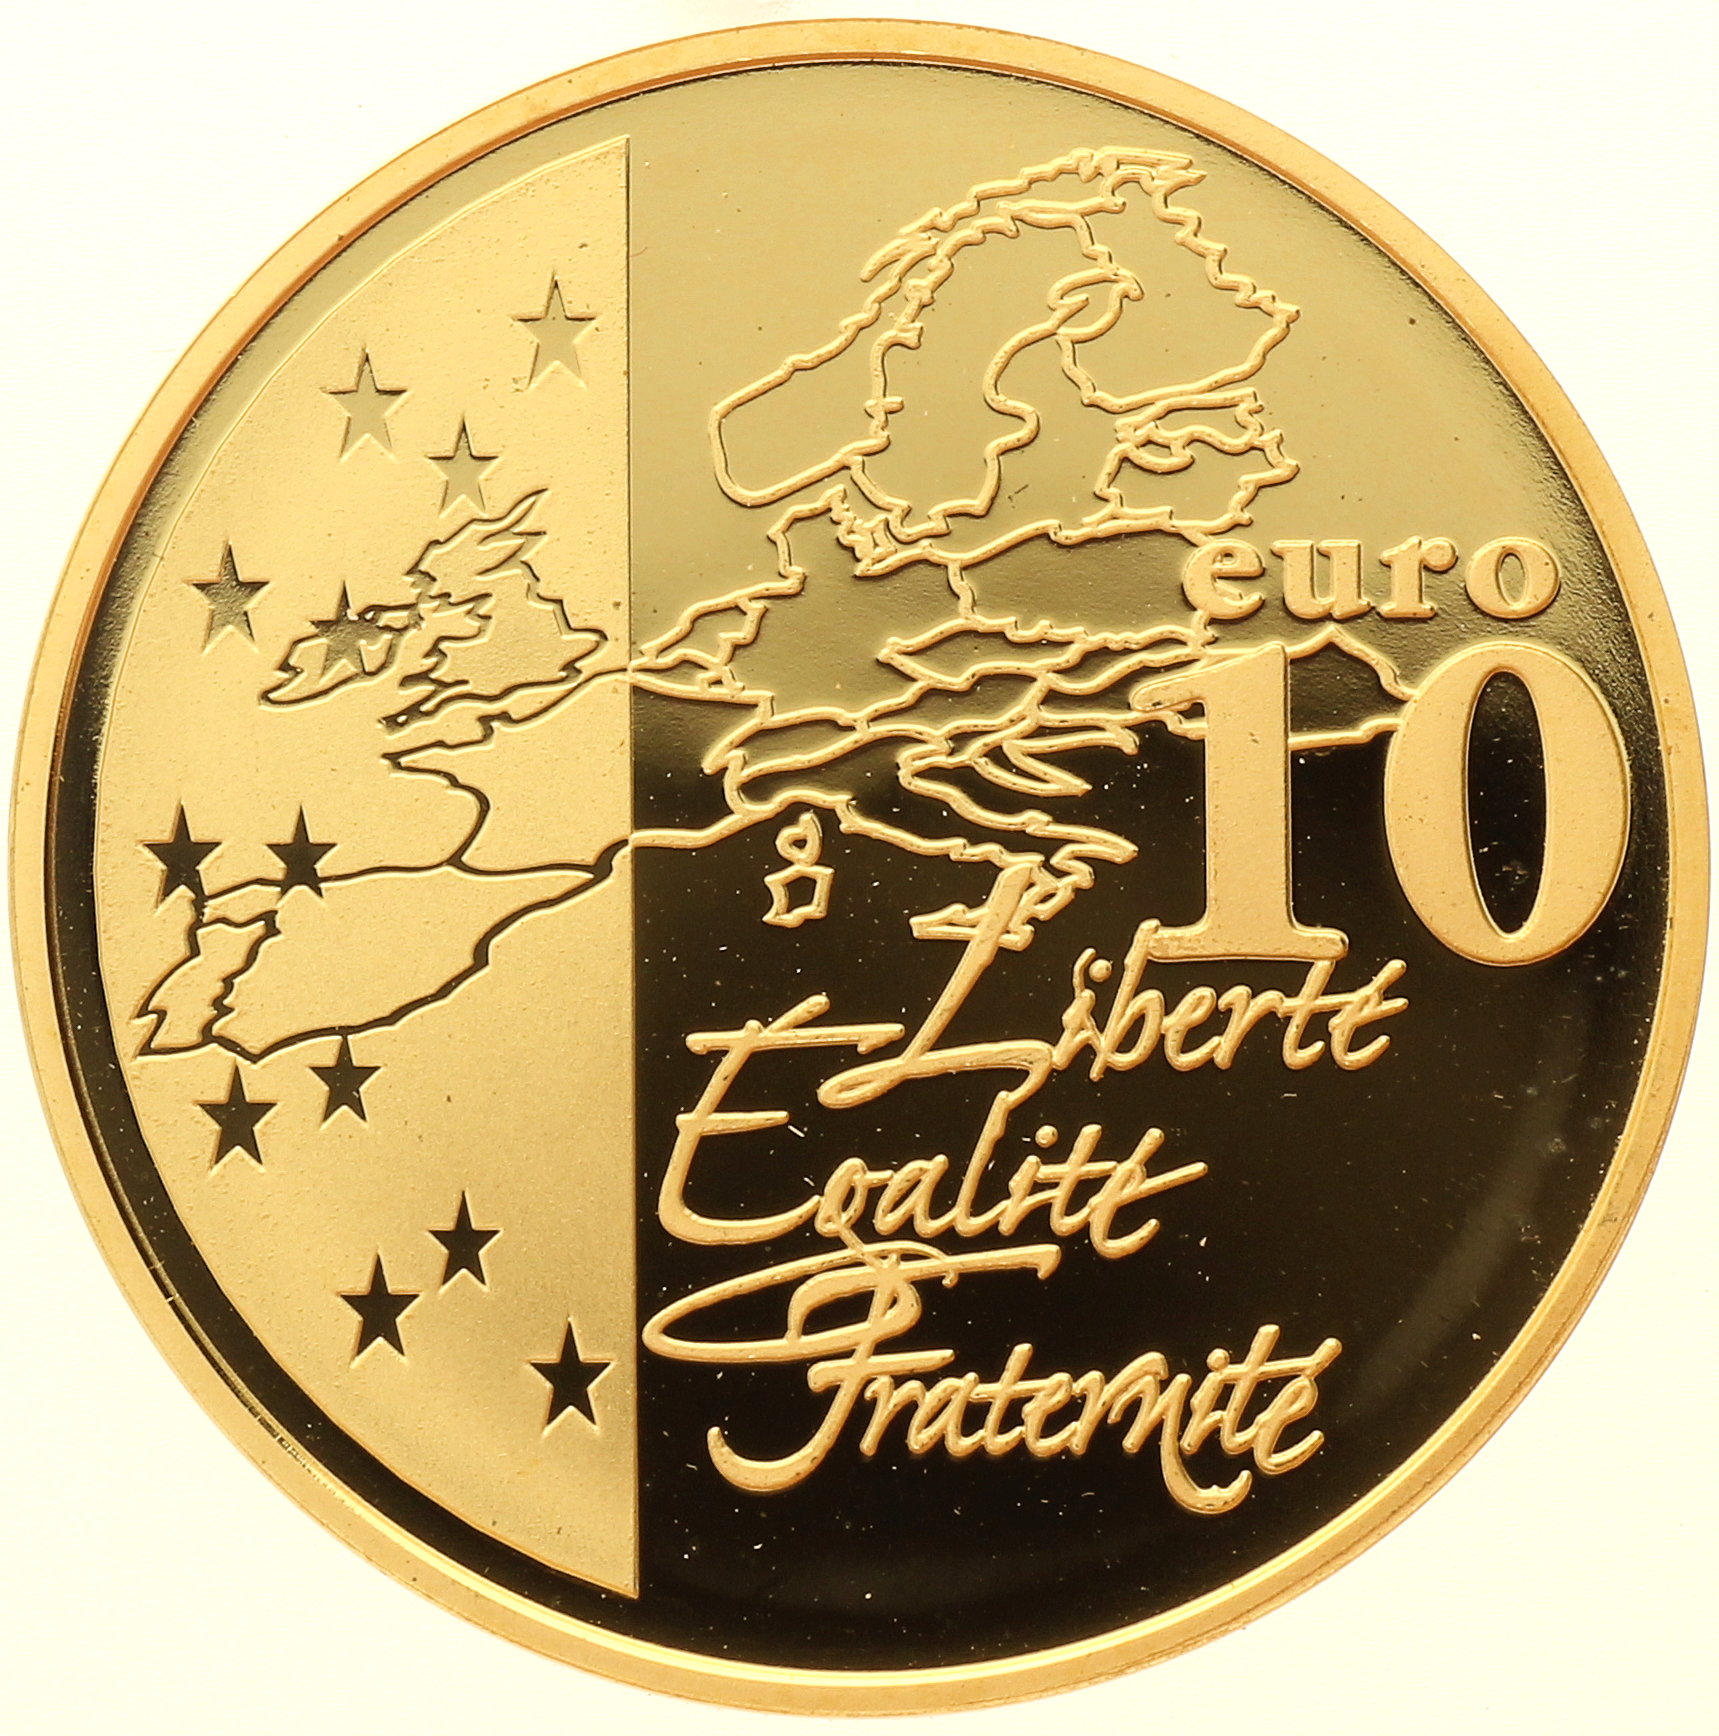 France - 10 Euro - 2003 - The seed sower - 1/4oz